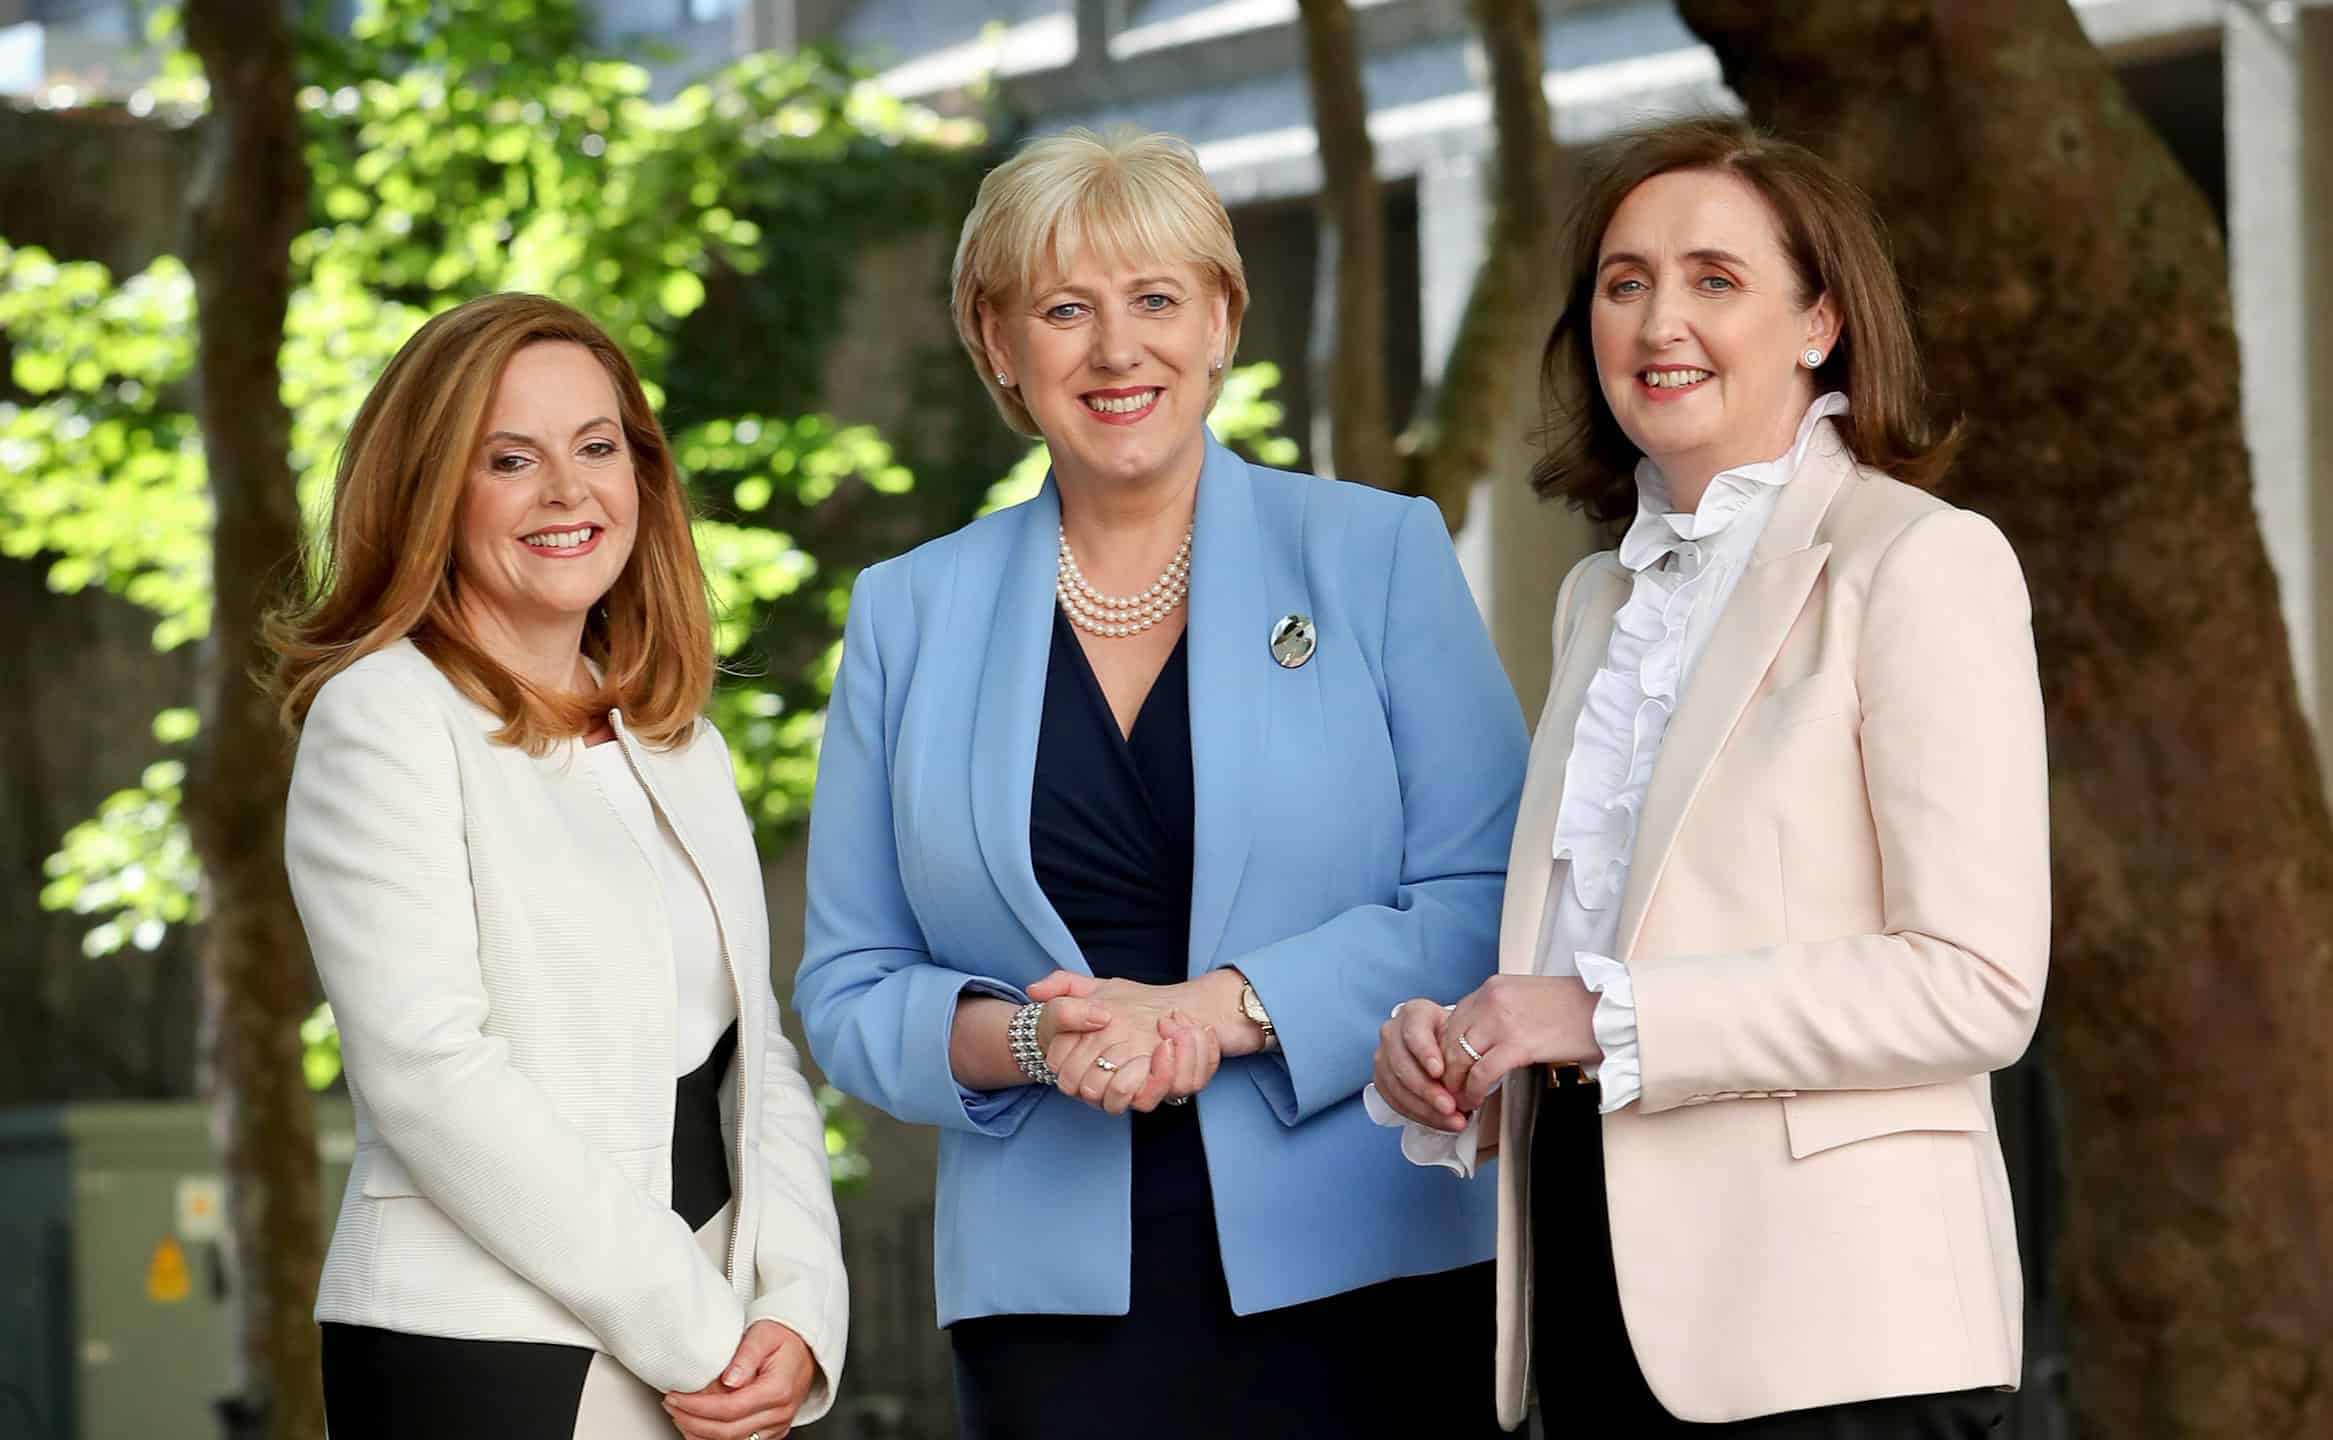 02/07/2018 NO REPRO FEE, MAXWELLS DUBLIN Pic shows ( l to r ) Anne Flood, Head of Capital Markets Intertrust Ireland, Minister for Business, Enterprise & Innovation, Heather Humphreys TD and Imelda Shine, Managing Director Intertrust Ireland. Intertrust Ireland has announced that continued growth and additional service offerings have resulted in an opportunity to create 60 new jobs. The company is a global leader in providing expert administrative services to clients operating and investing in the international business environment. PIC: NO FEE, MAXWELLPHOTOGRAPHY.IE